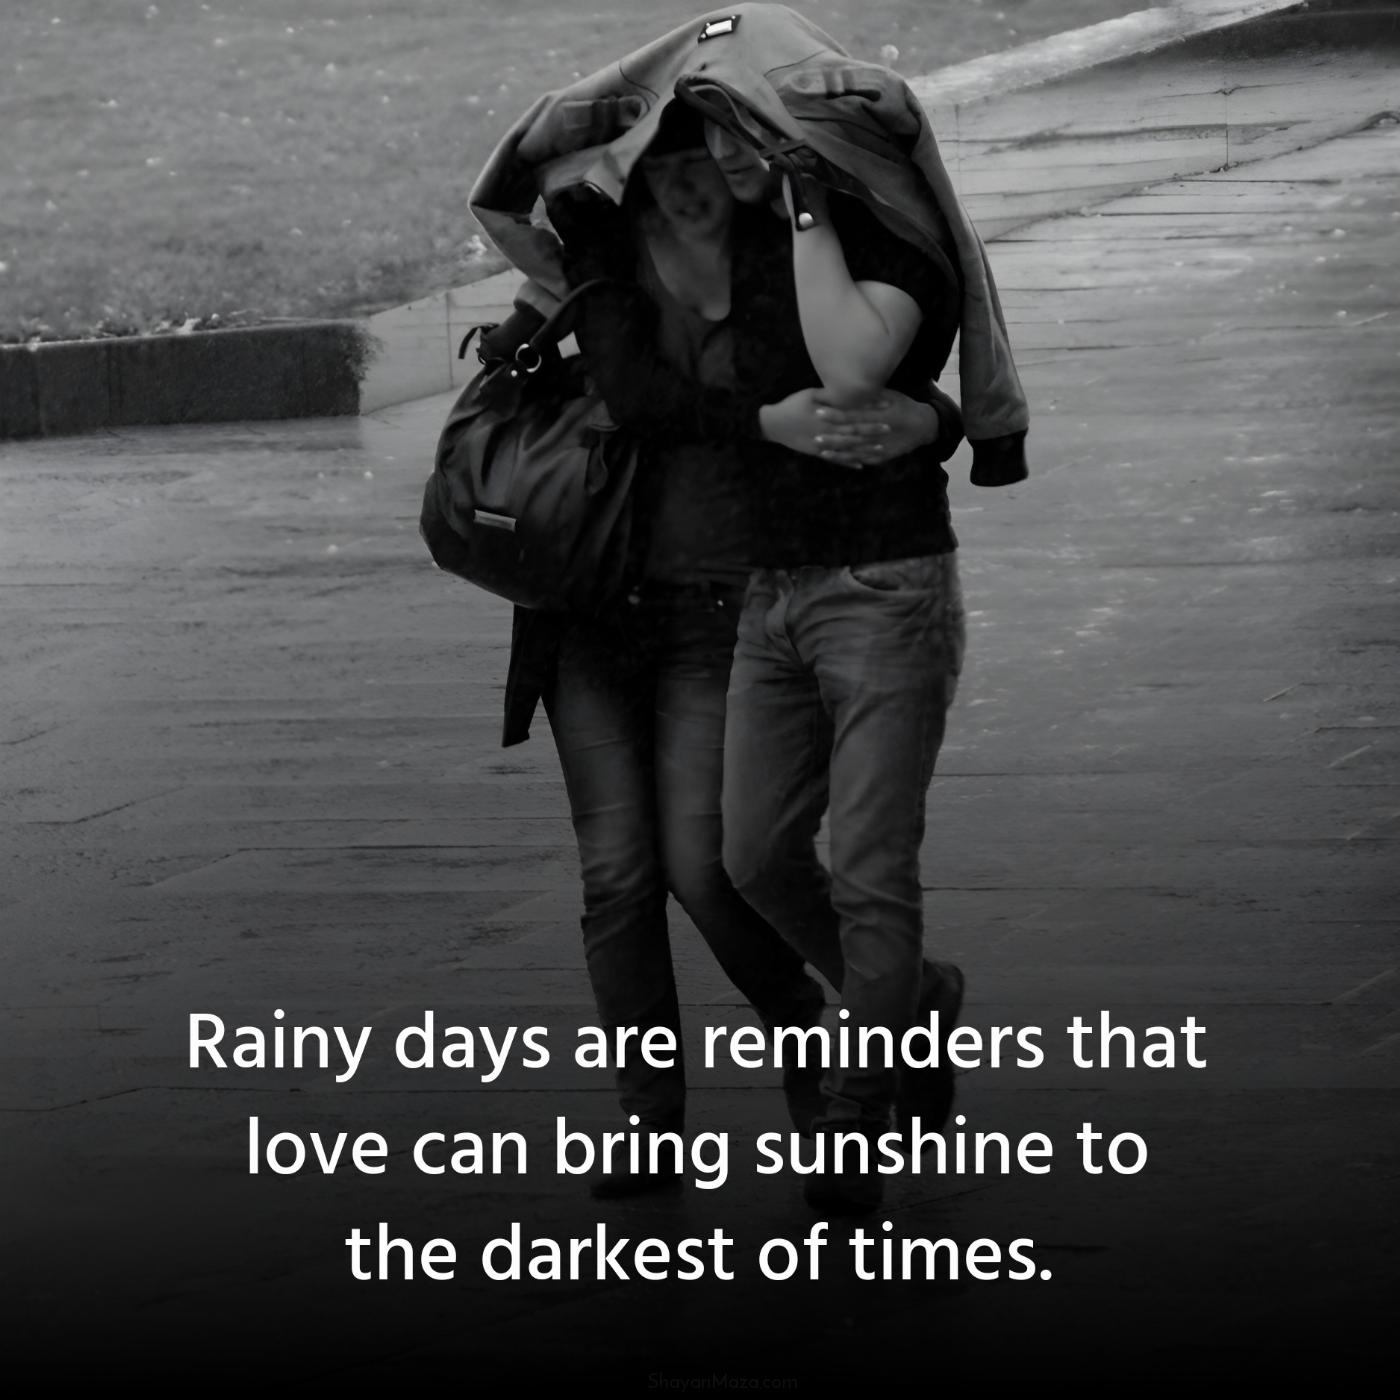 Rainy days are reminders that love can bring sunshine